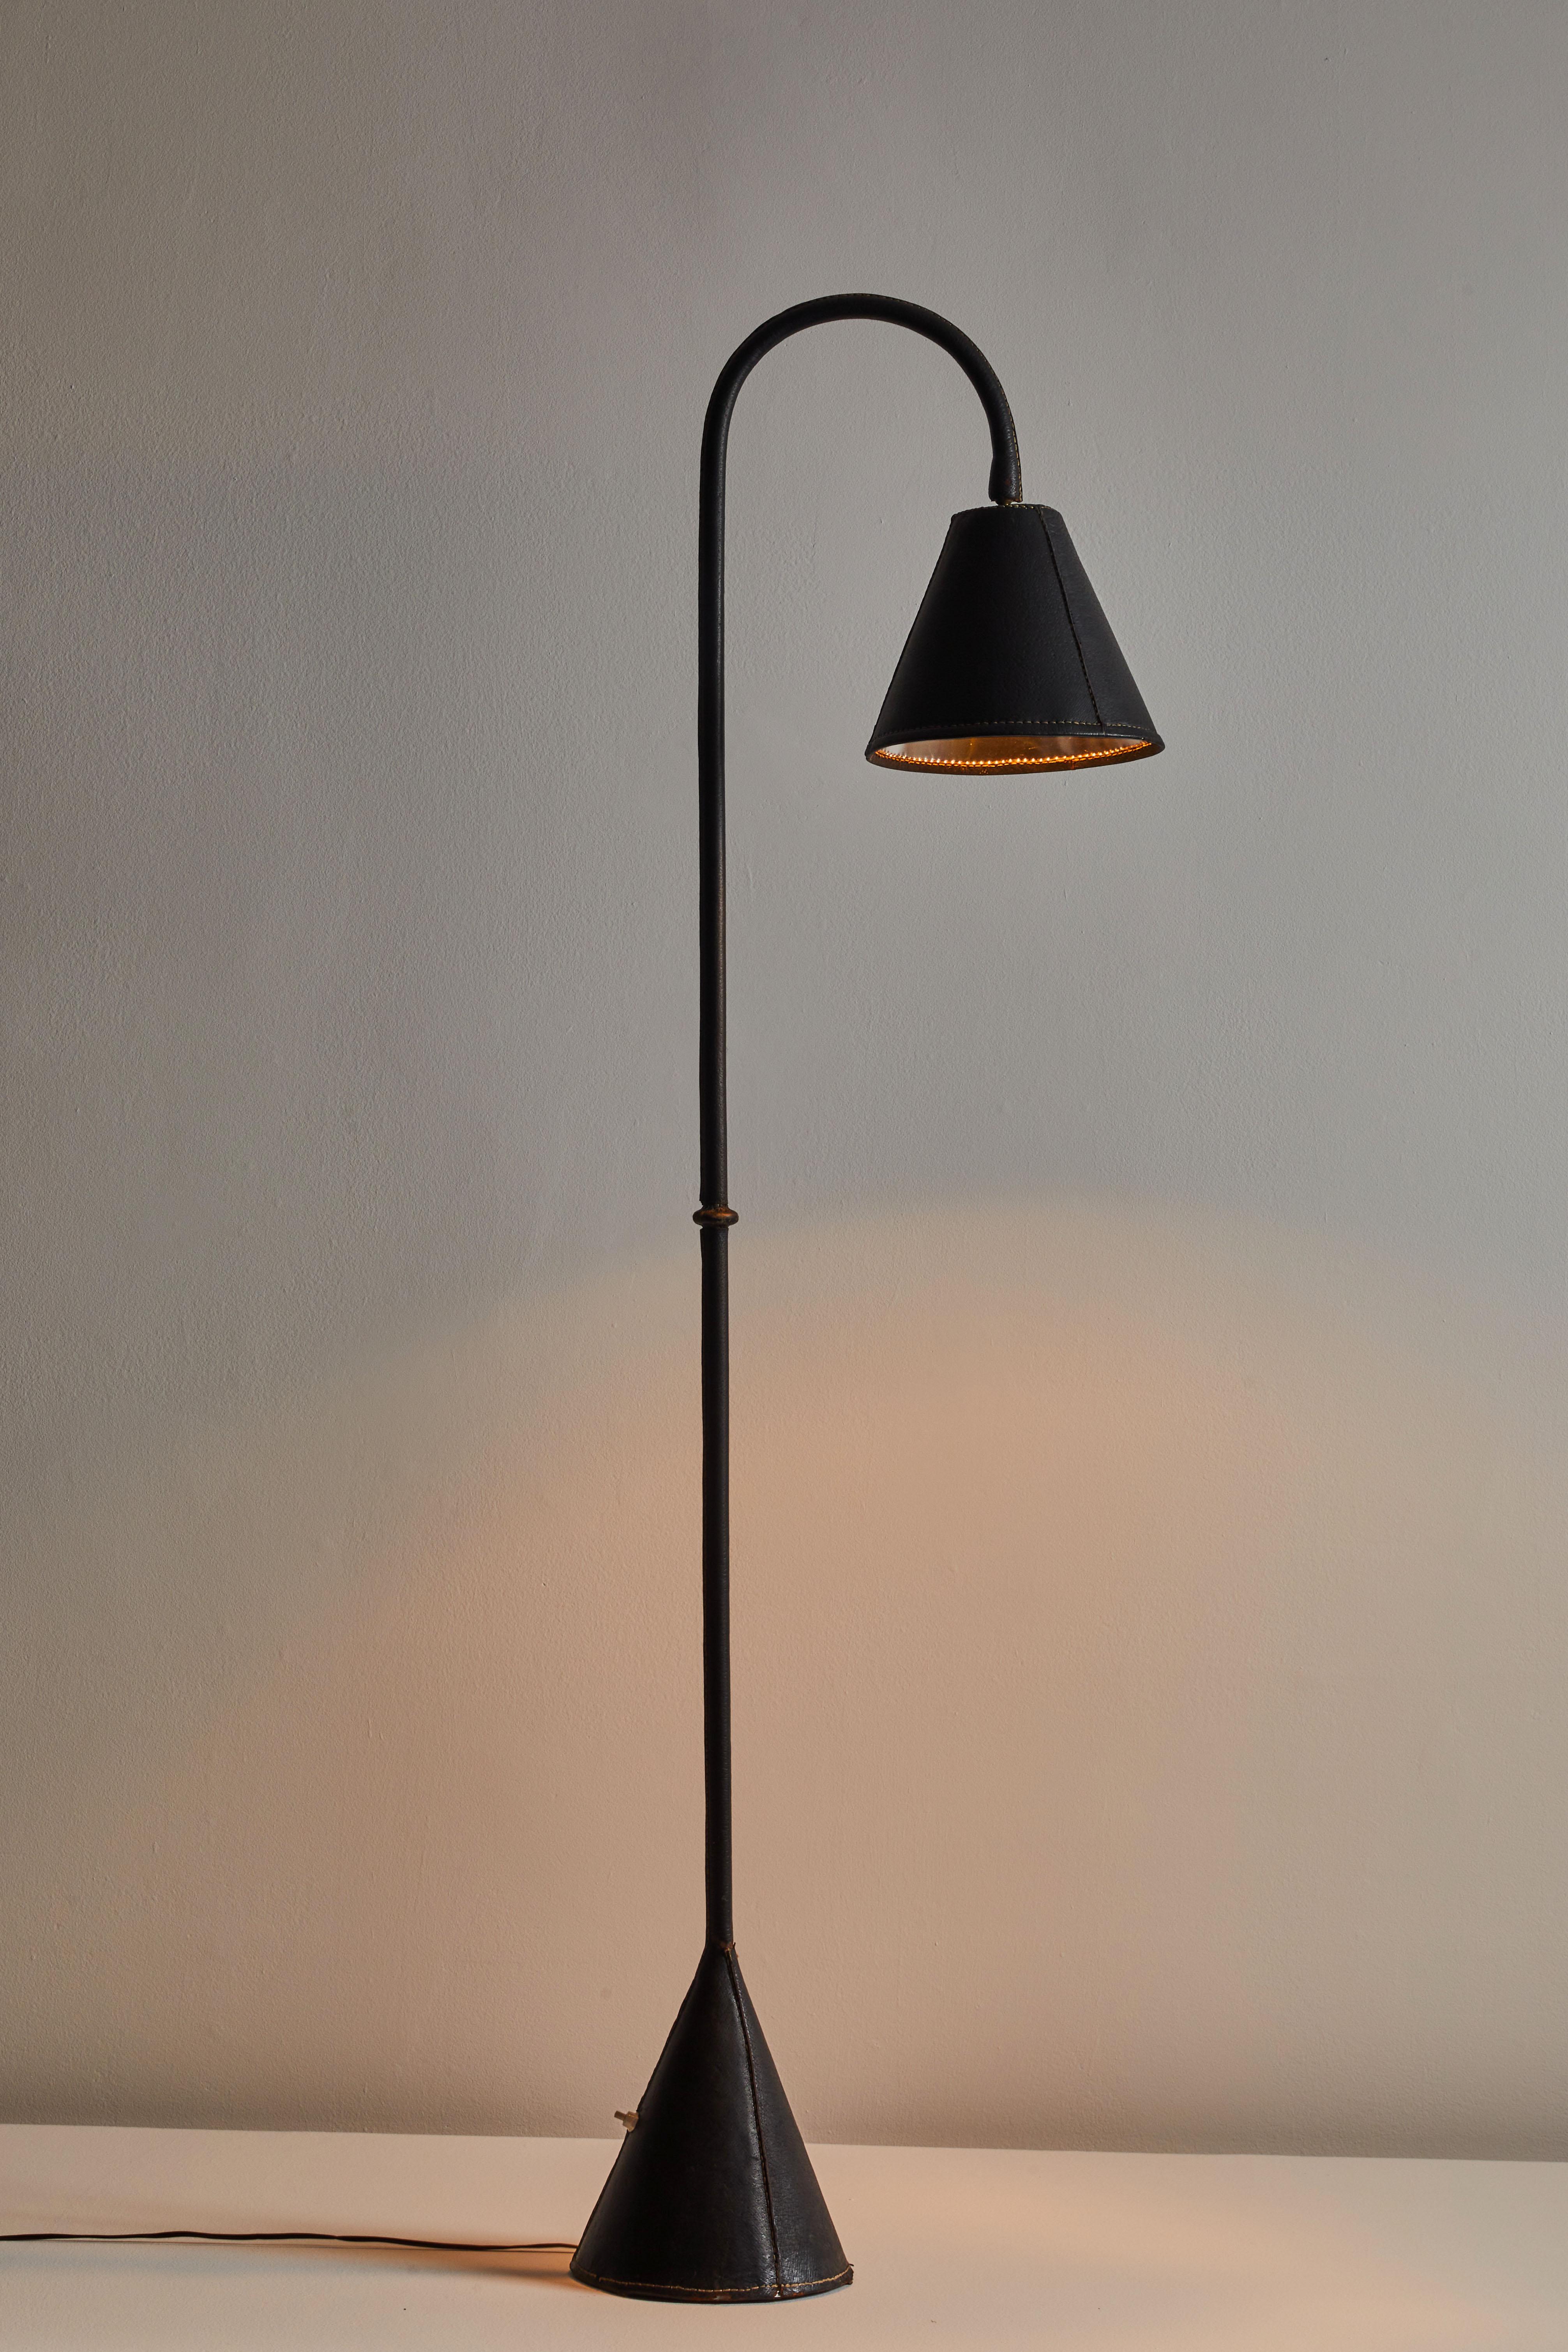 Floor lamp by Valenti. Manufactured in Spain, circa 1960s. Saddle-stitched distressed leather over steel. Shade articulates up/down and left/right. On/off switch on base of lamp. Rewired for U.S. sockets with black French twist cord. We recommend